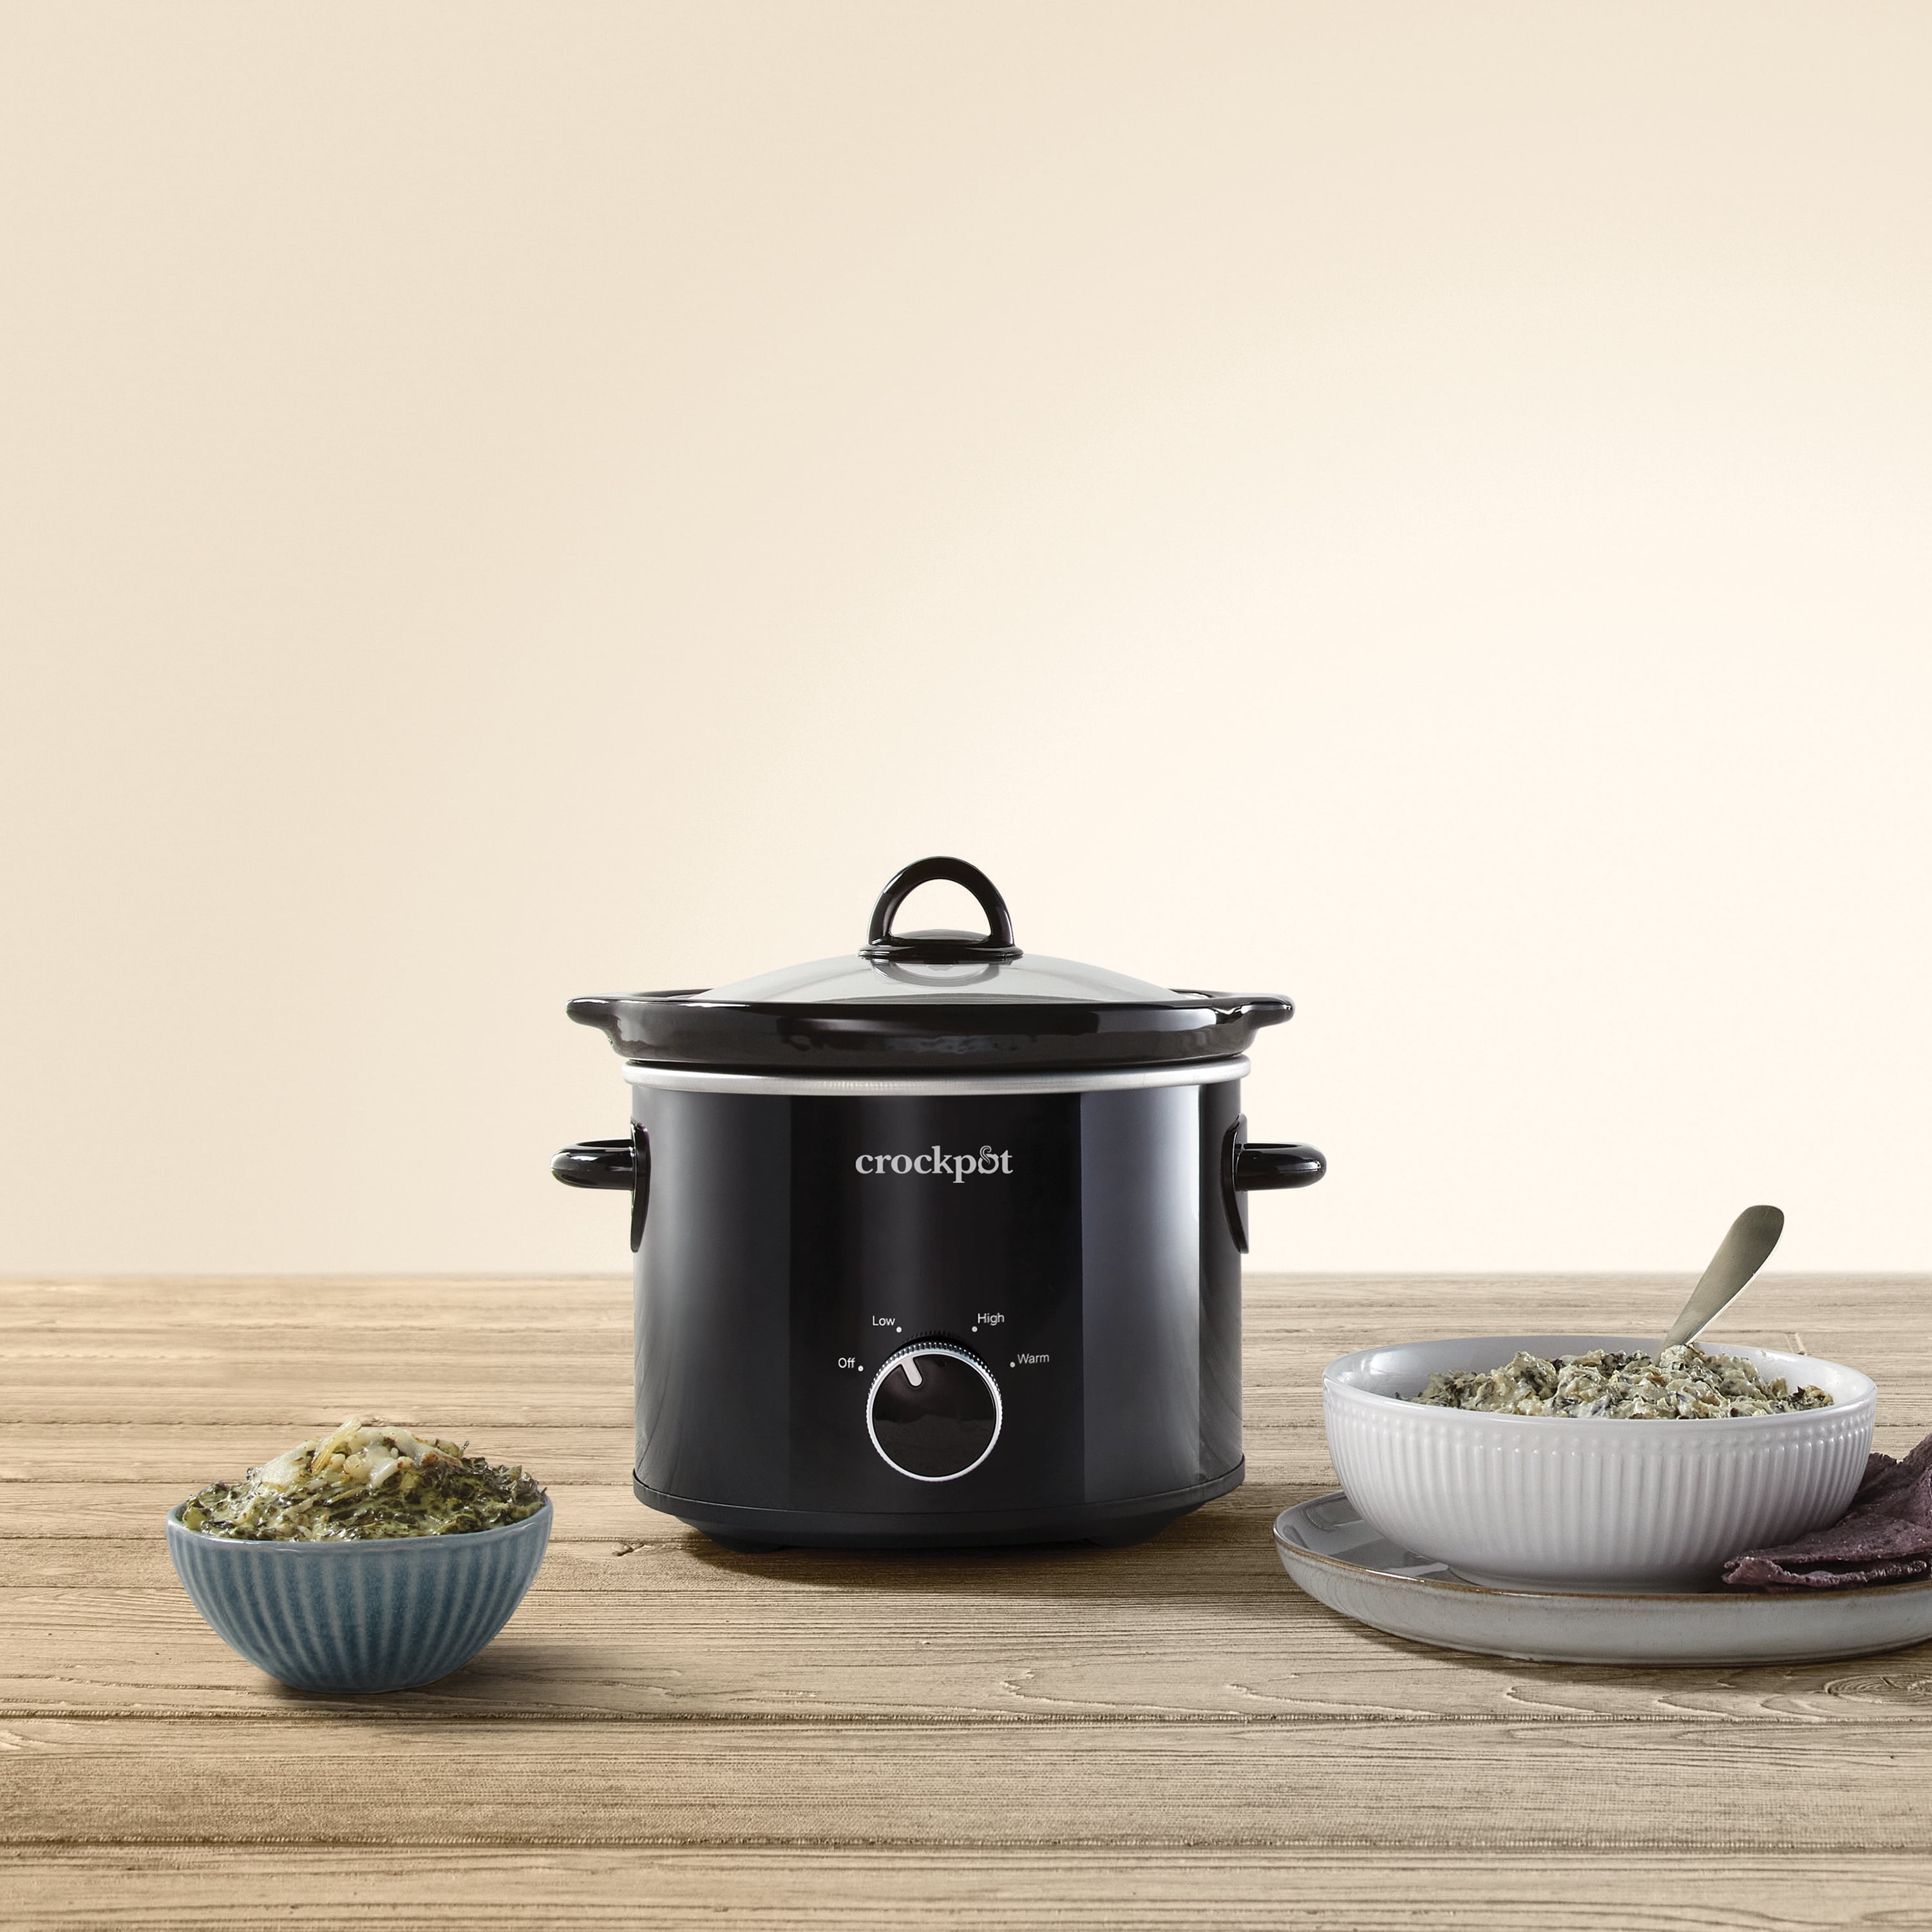 Chefman Slow Cooker, Compact Personal Size for 2+ People